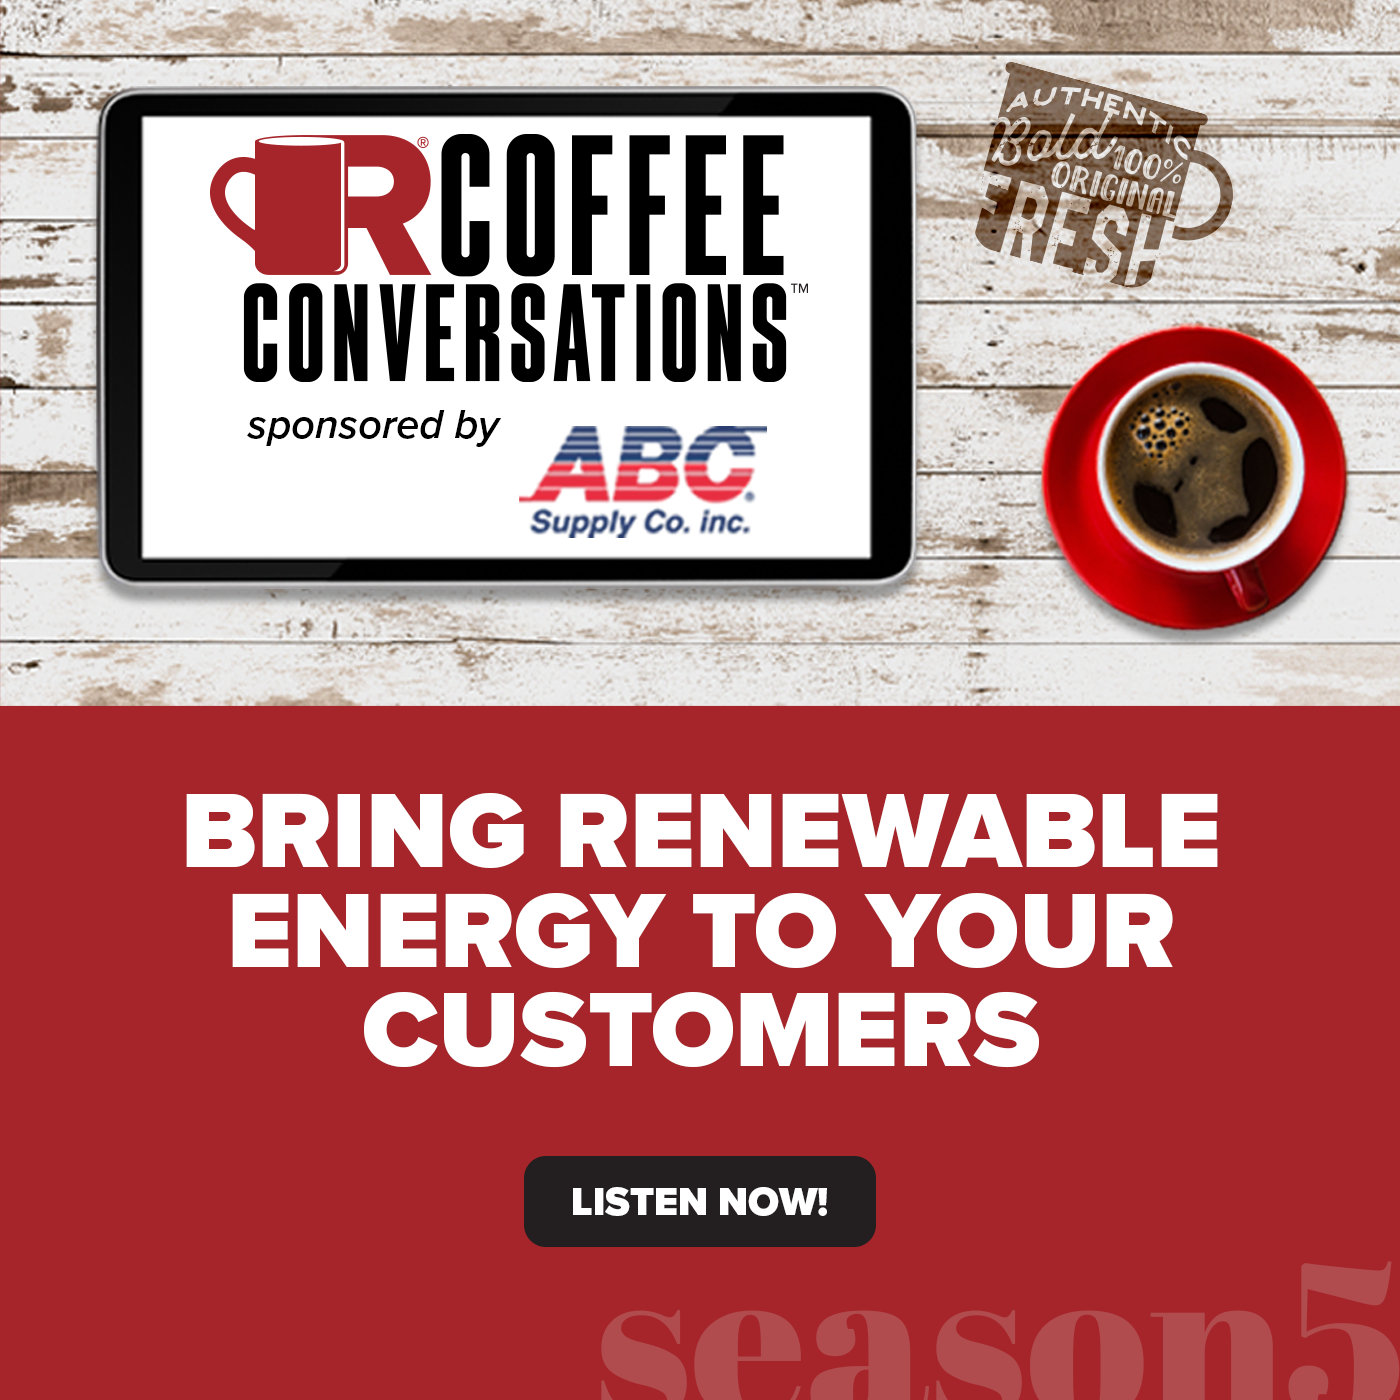 ABC - Coffee Conversations - Bring Renewable Energy to Your Customers With ABC Supply! - POD